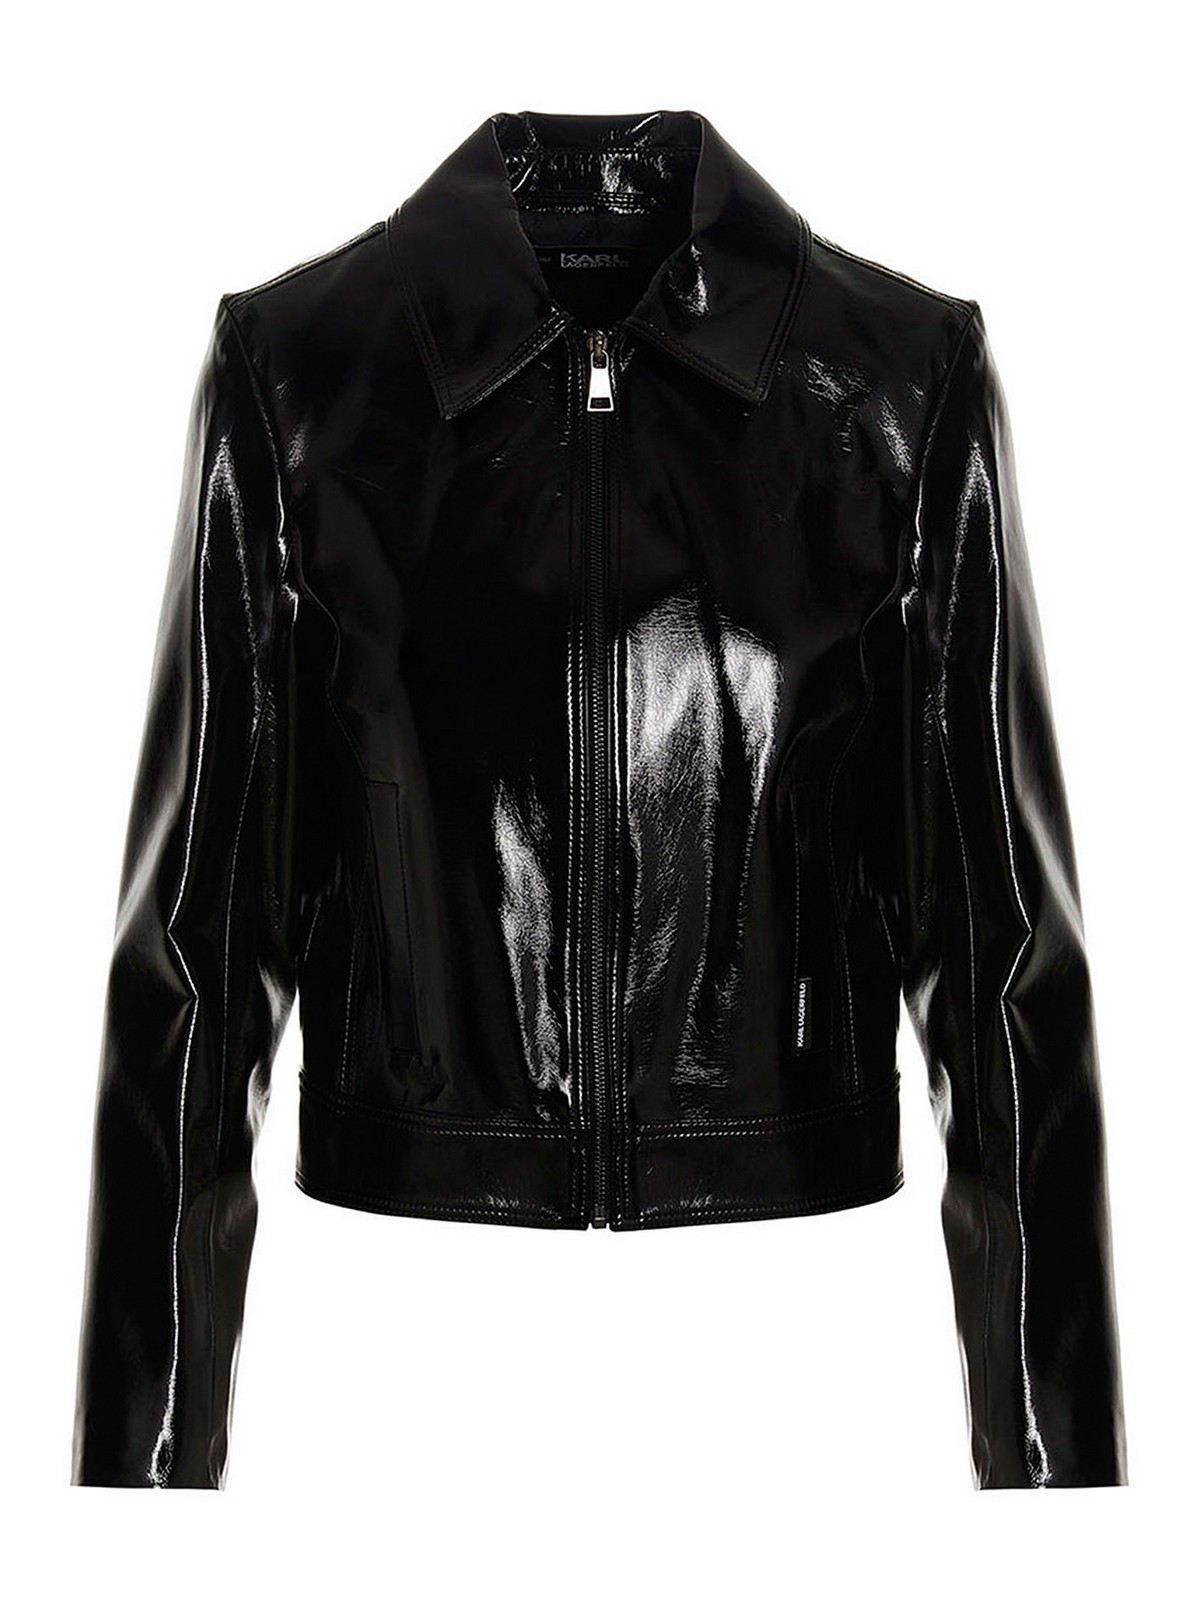 Leather jacket Karl Lagerfeld - Vinyl-effect jacket with a zip ...